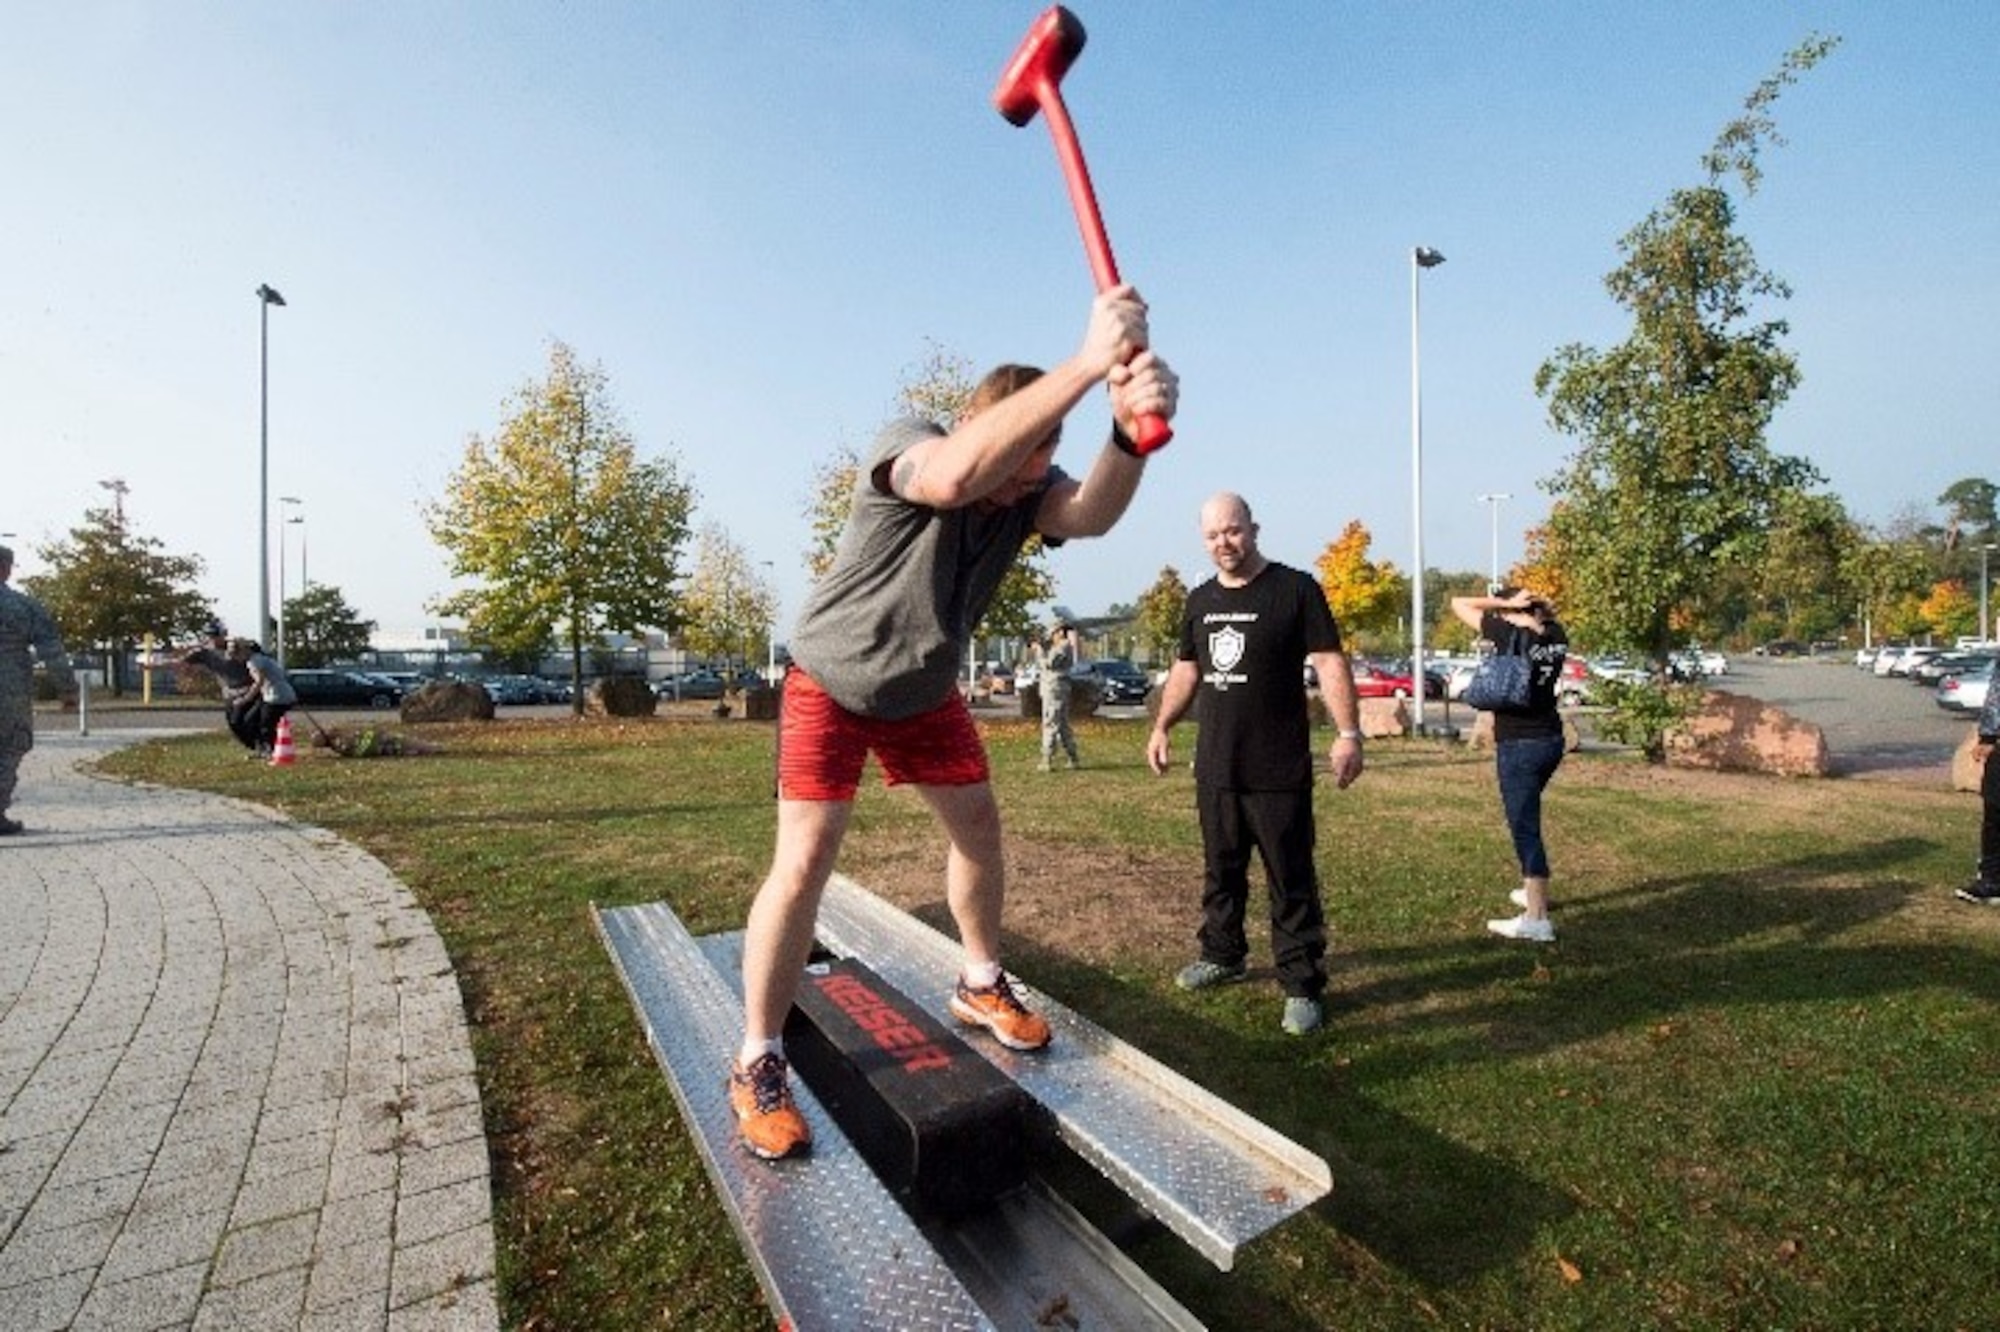 U.S. Army Staff Sgt. Jonathan Partin, Landstuhl Regional Medical Center non-commissioned officer in charge of cardiology, swings a mallet as part of the 86th Civil Engineer Squadron challenge during The Amazing Base competition on Ramstein Air Base, Germany, Oct. 10, 2018. The device, known as a Keiser Sled, is an exercise machine featuring a sliding block on a platform, which is swung at by someone standing above the block to build strength.